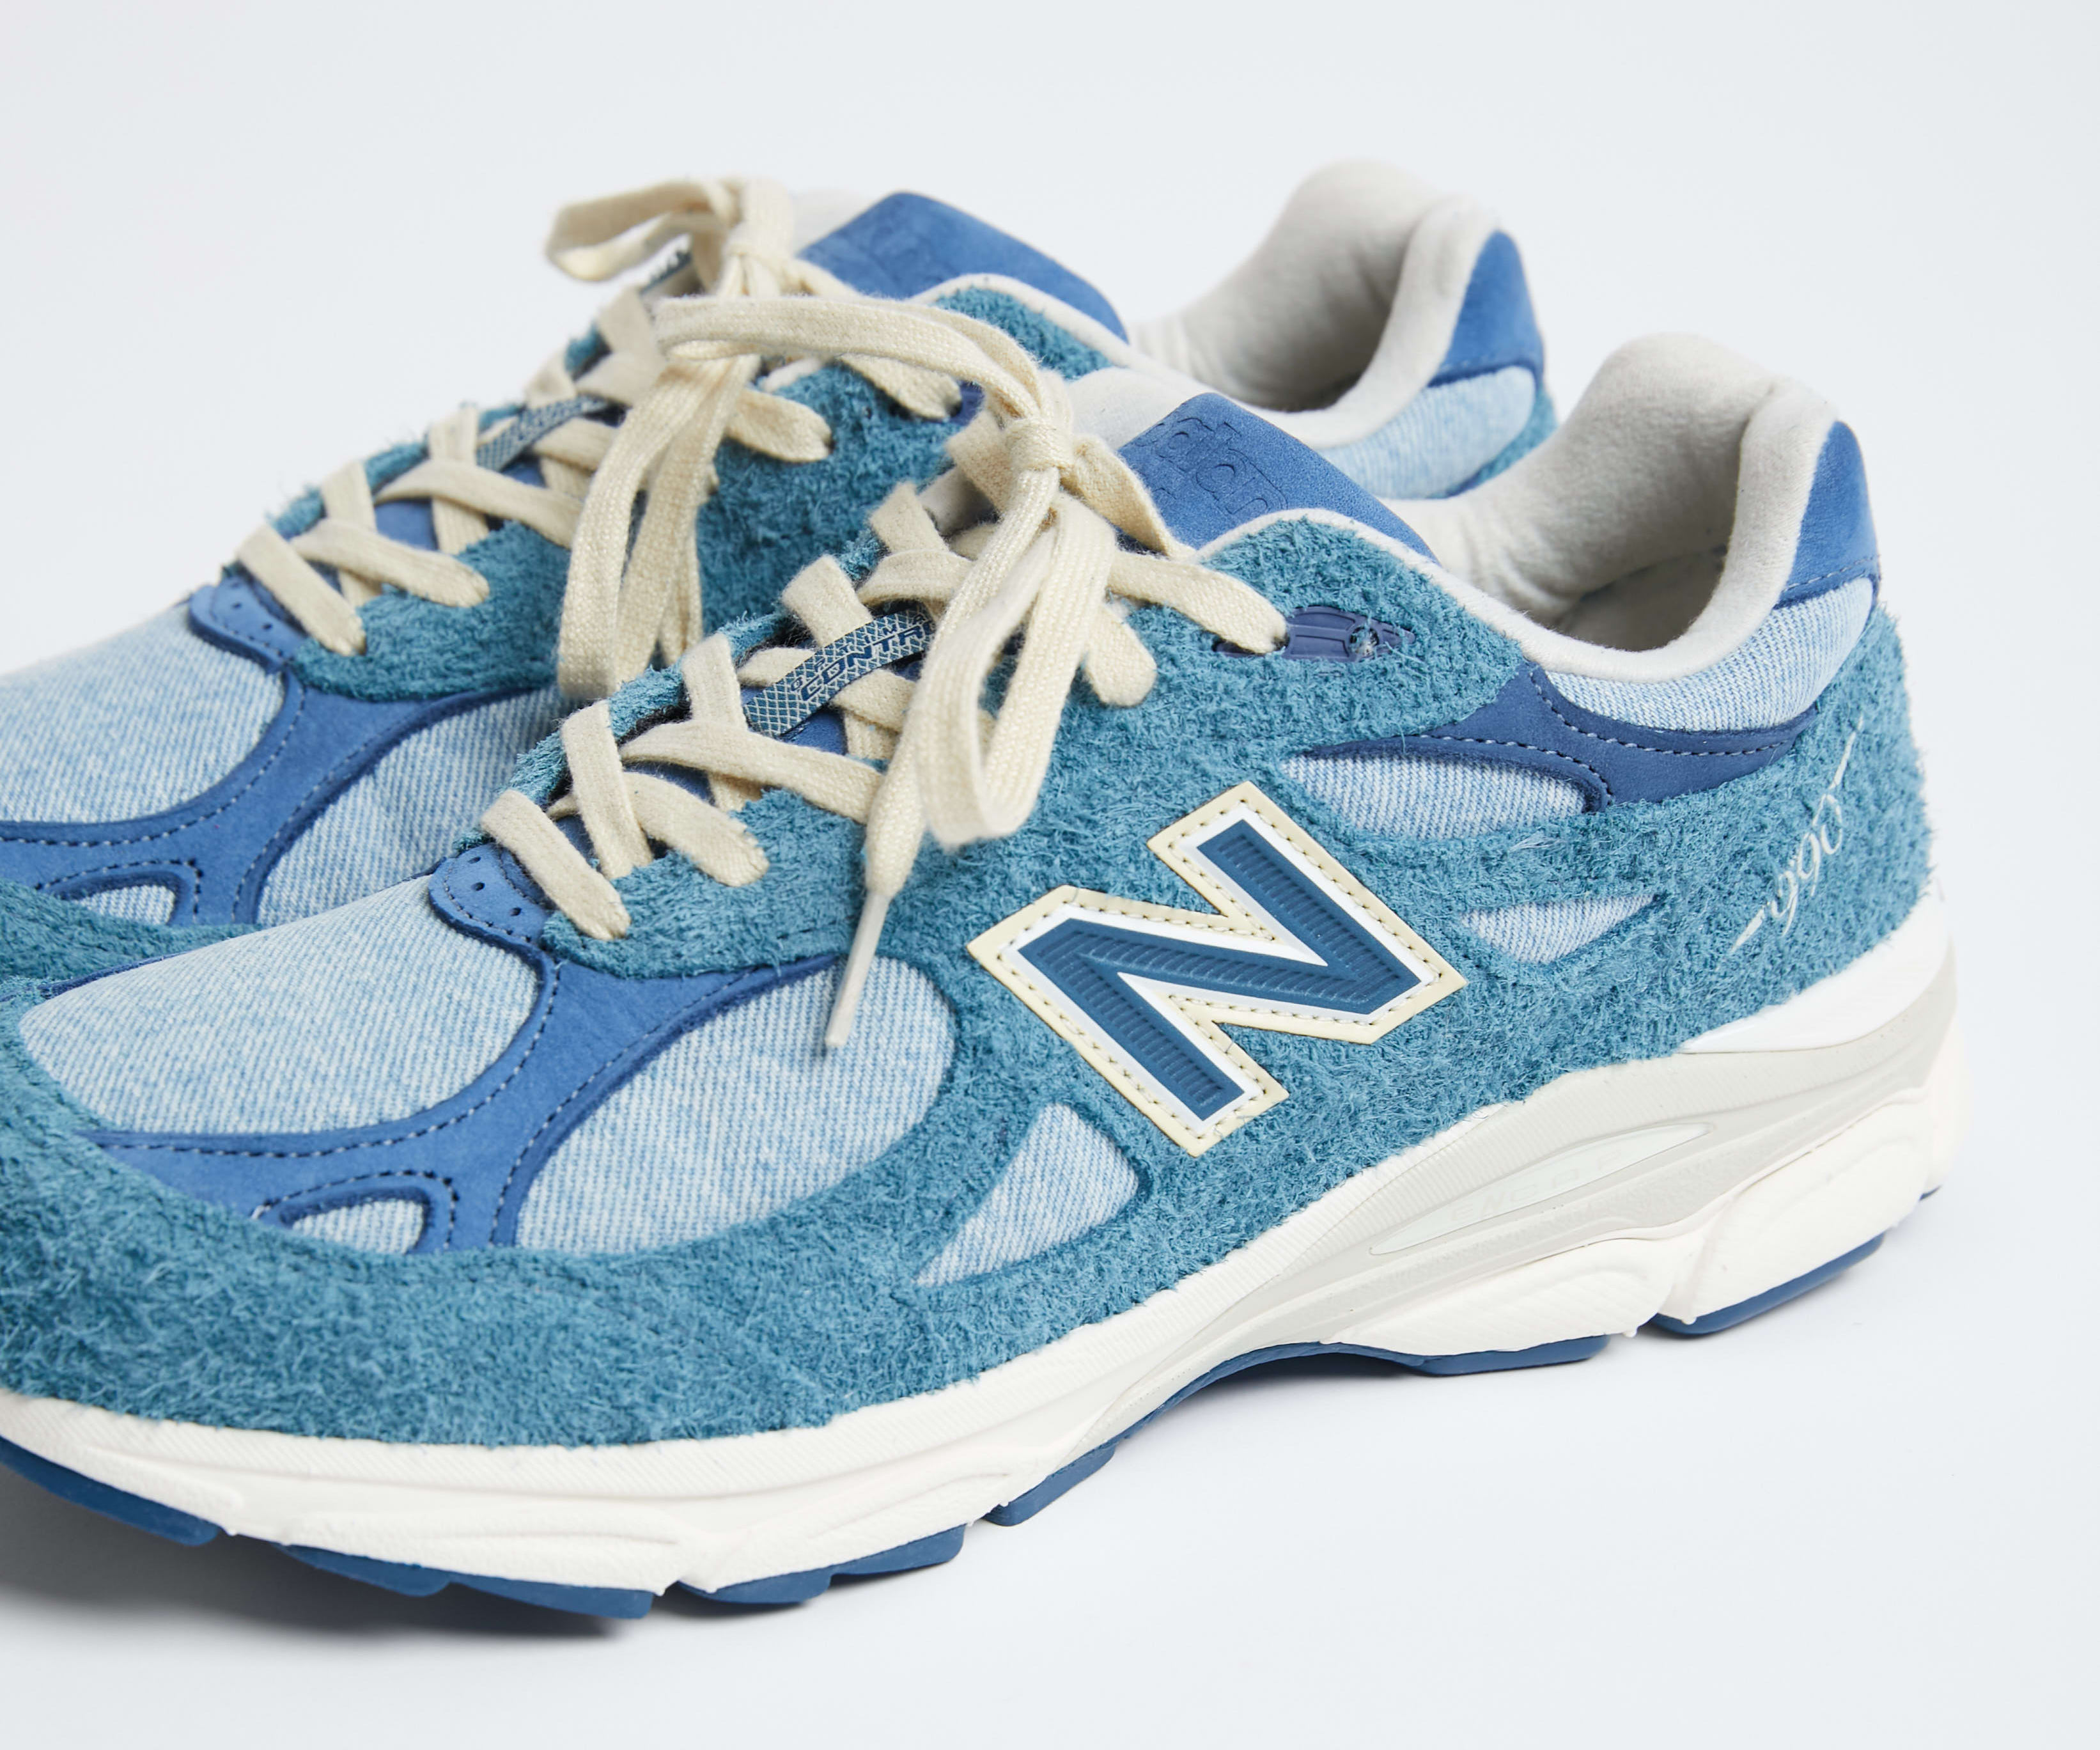 Levi's x New Balance 990v3 Sneaker Collaboration Release Date 